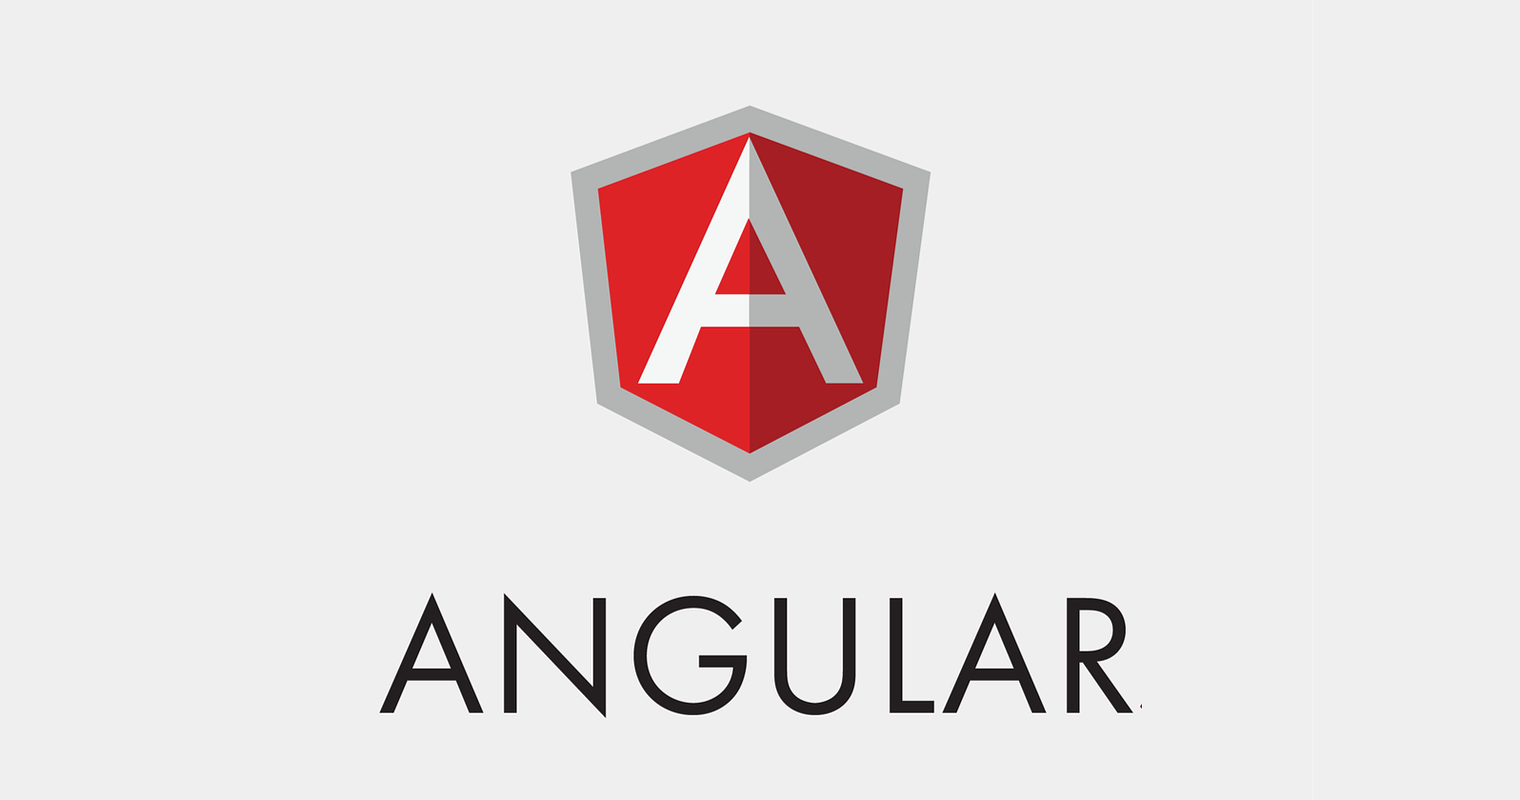 SEO Guide to Angular: Everything You Need to Know